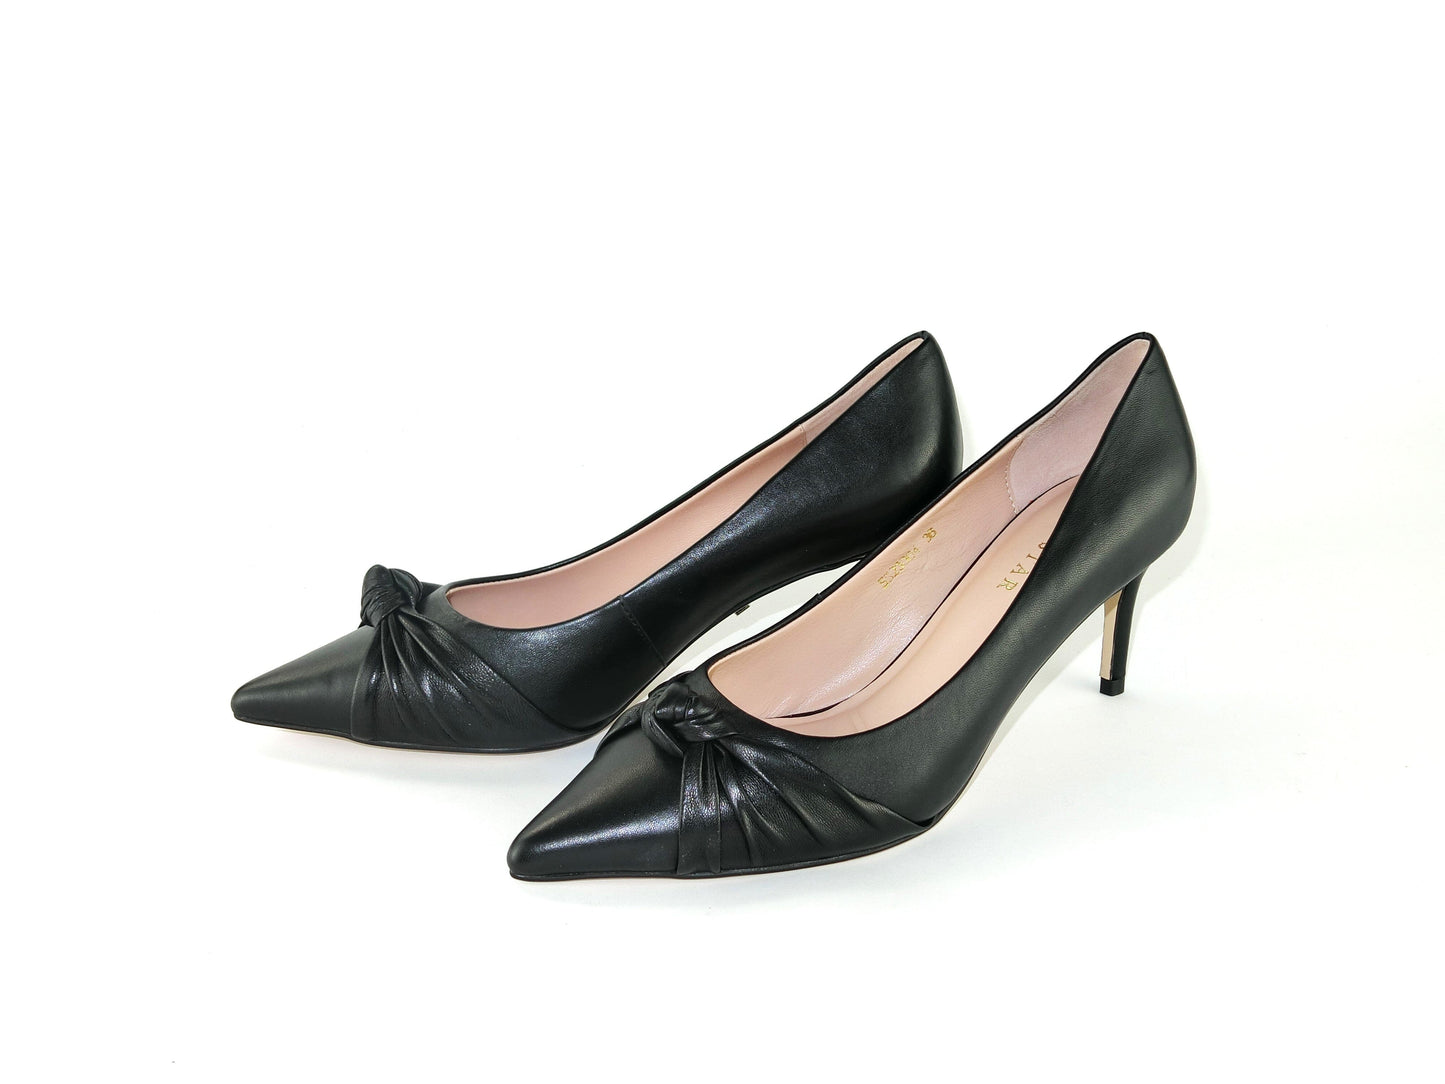 SS23004 Leather court shoes with knot design - Black and Tan ladies shoes Sam Star shoes 